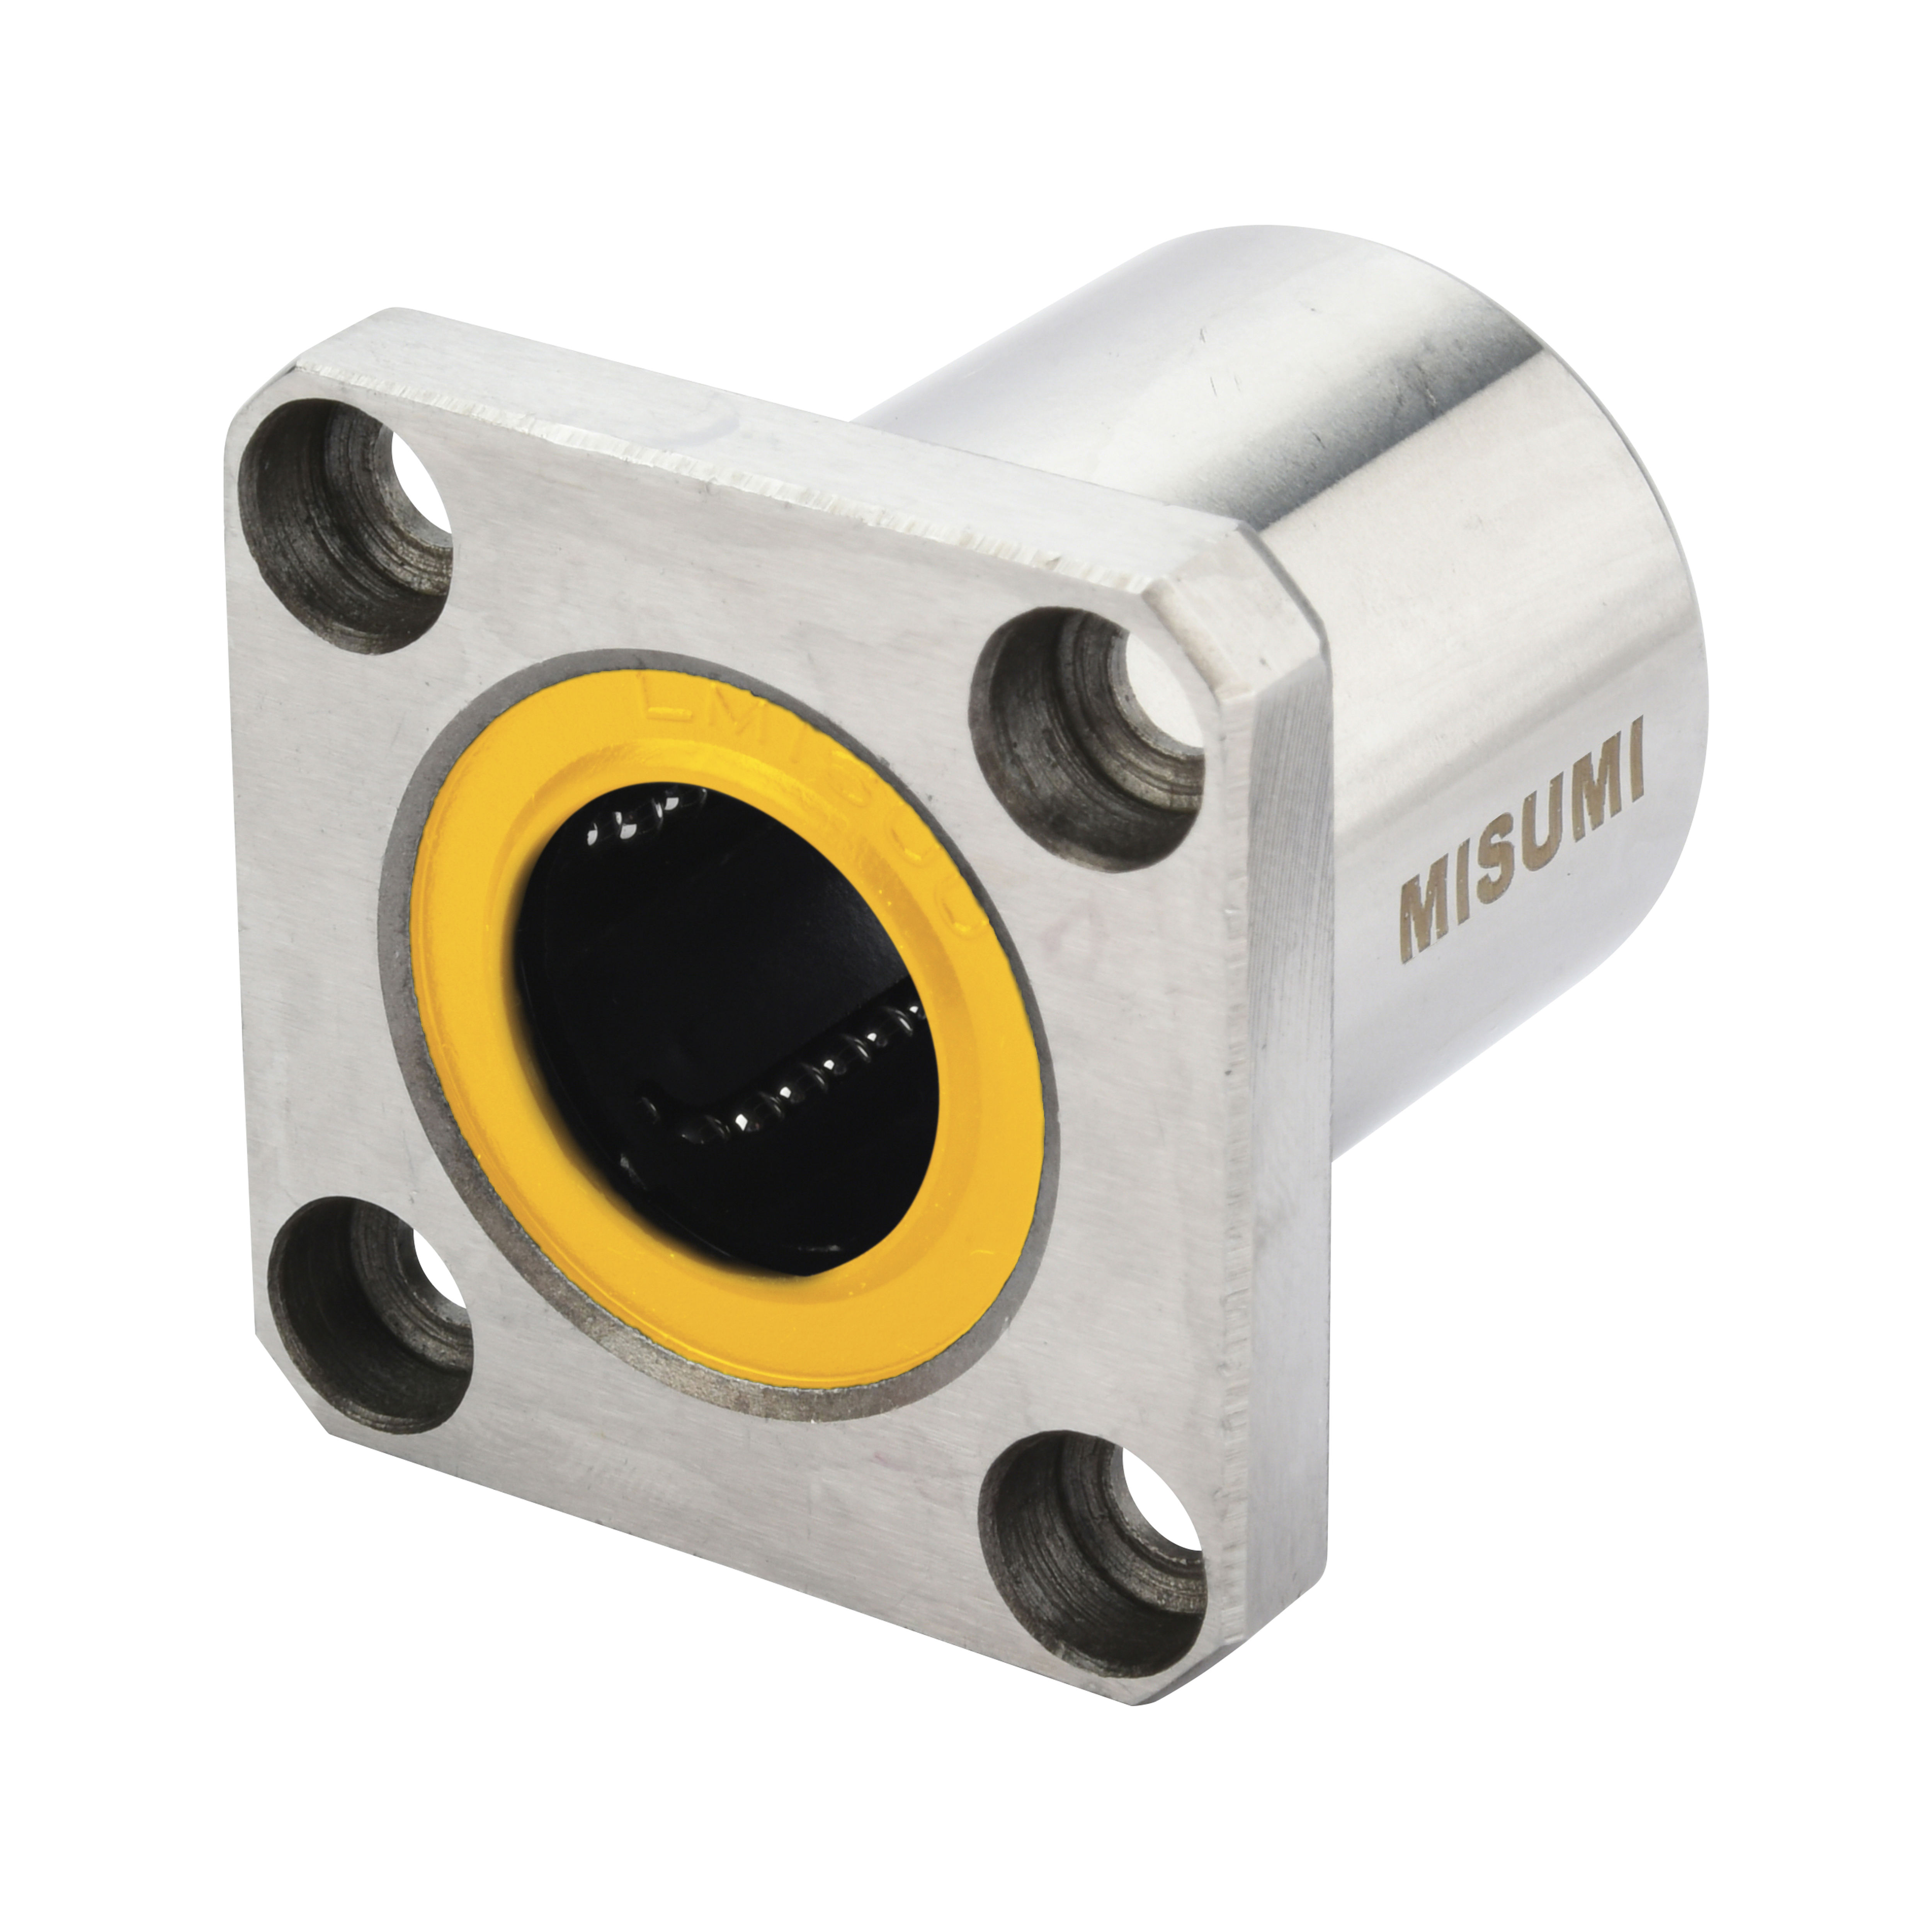 Square Flanged Linear Bushings, Single / Double / Opposite Counterbored Hole C-LMK6UU